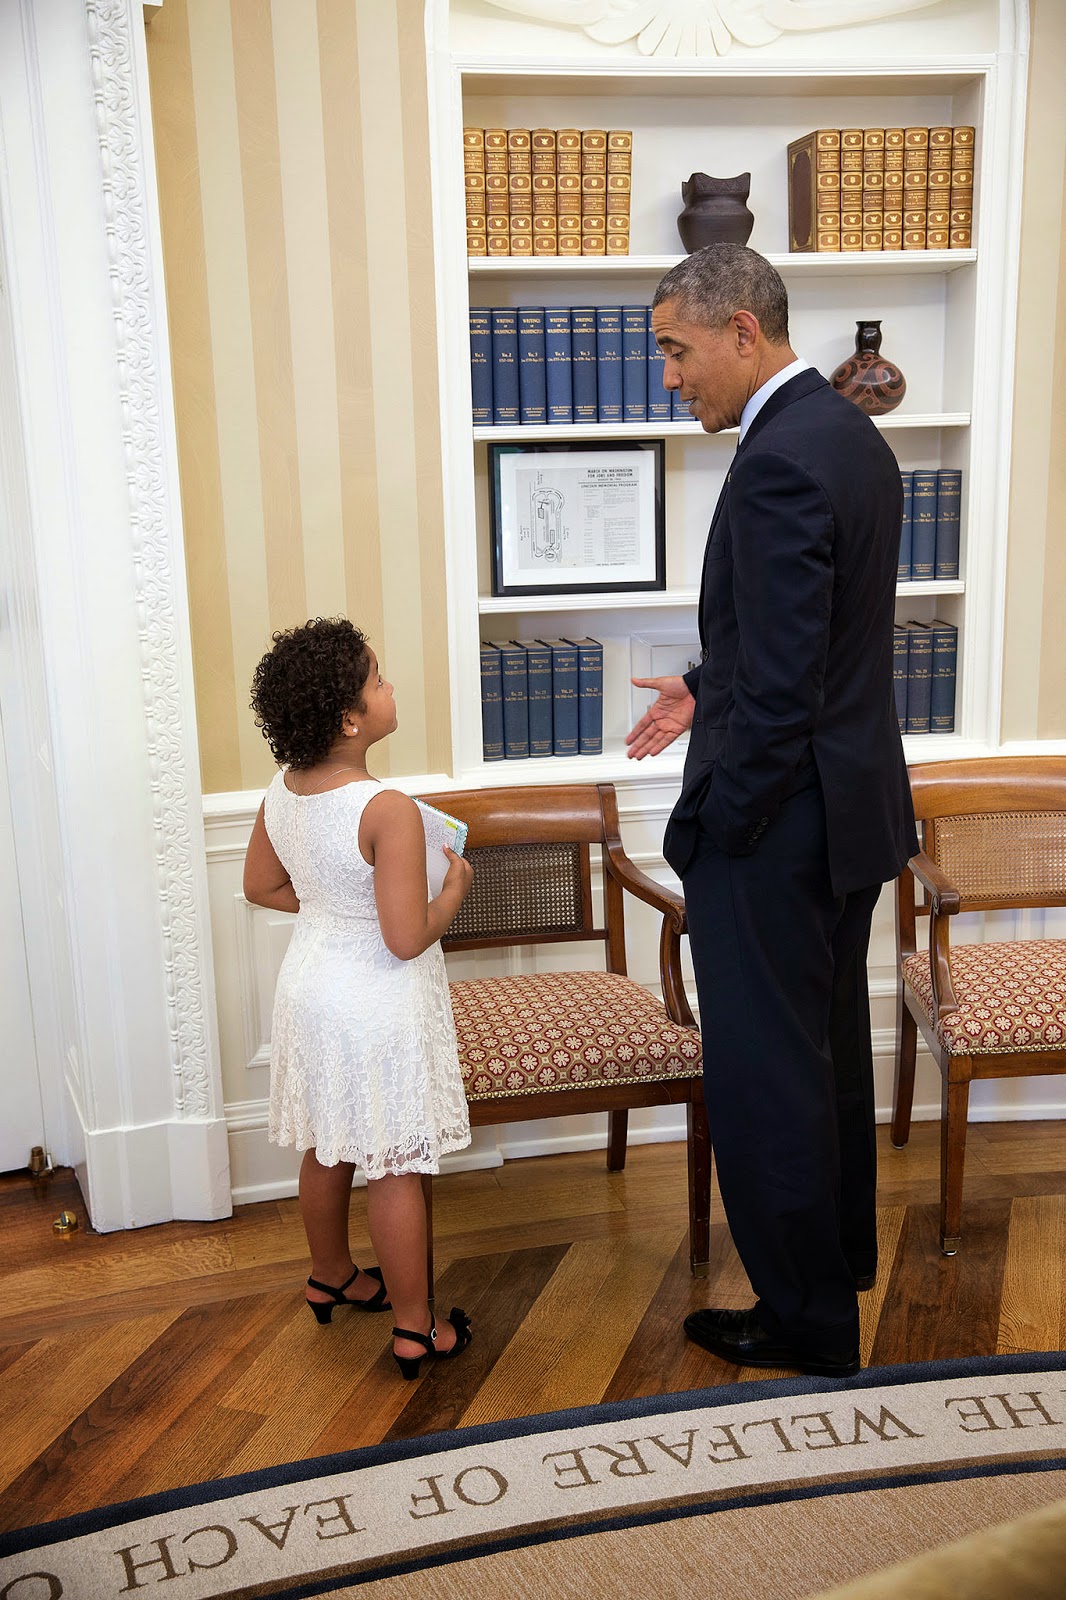 Political Style: Behind the Scenes at the White House: Summer 20141066 x 1600